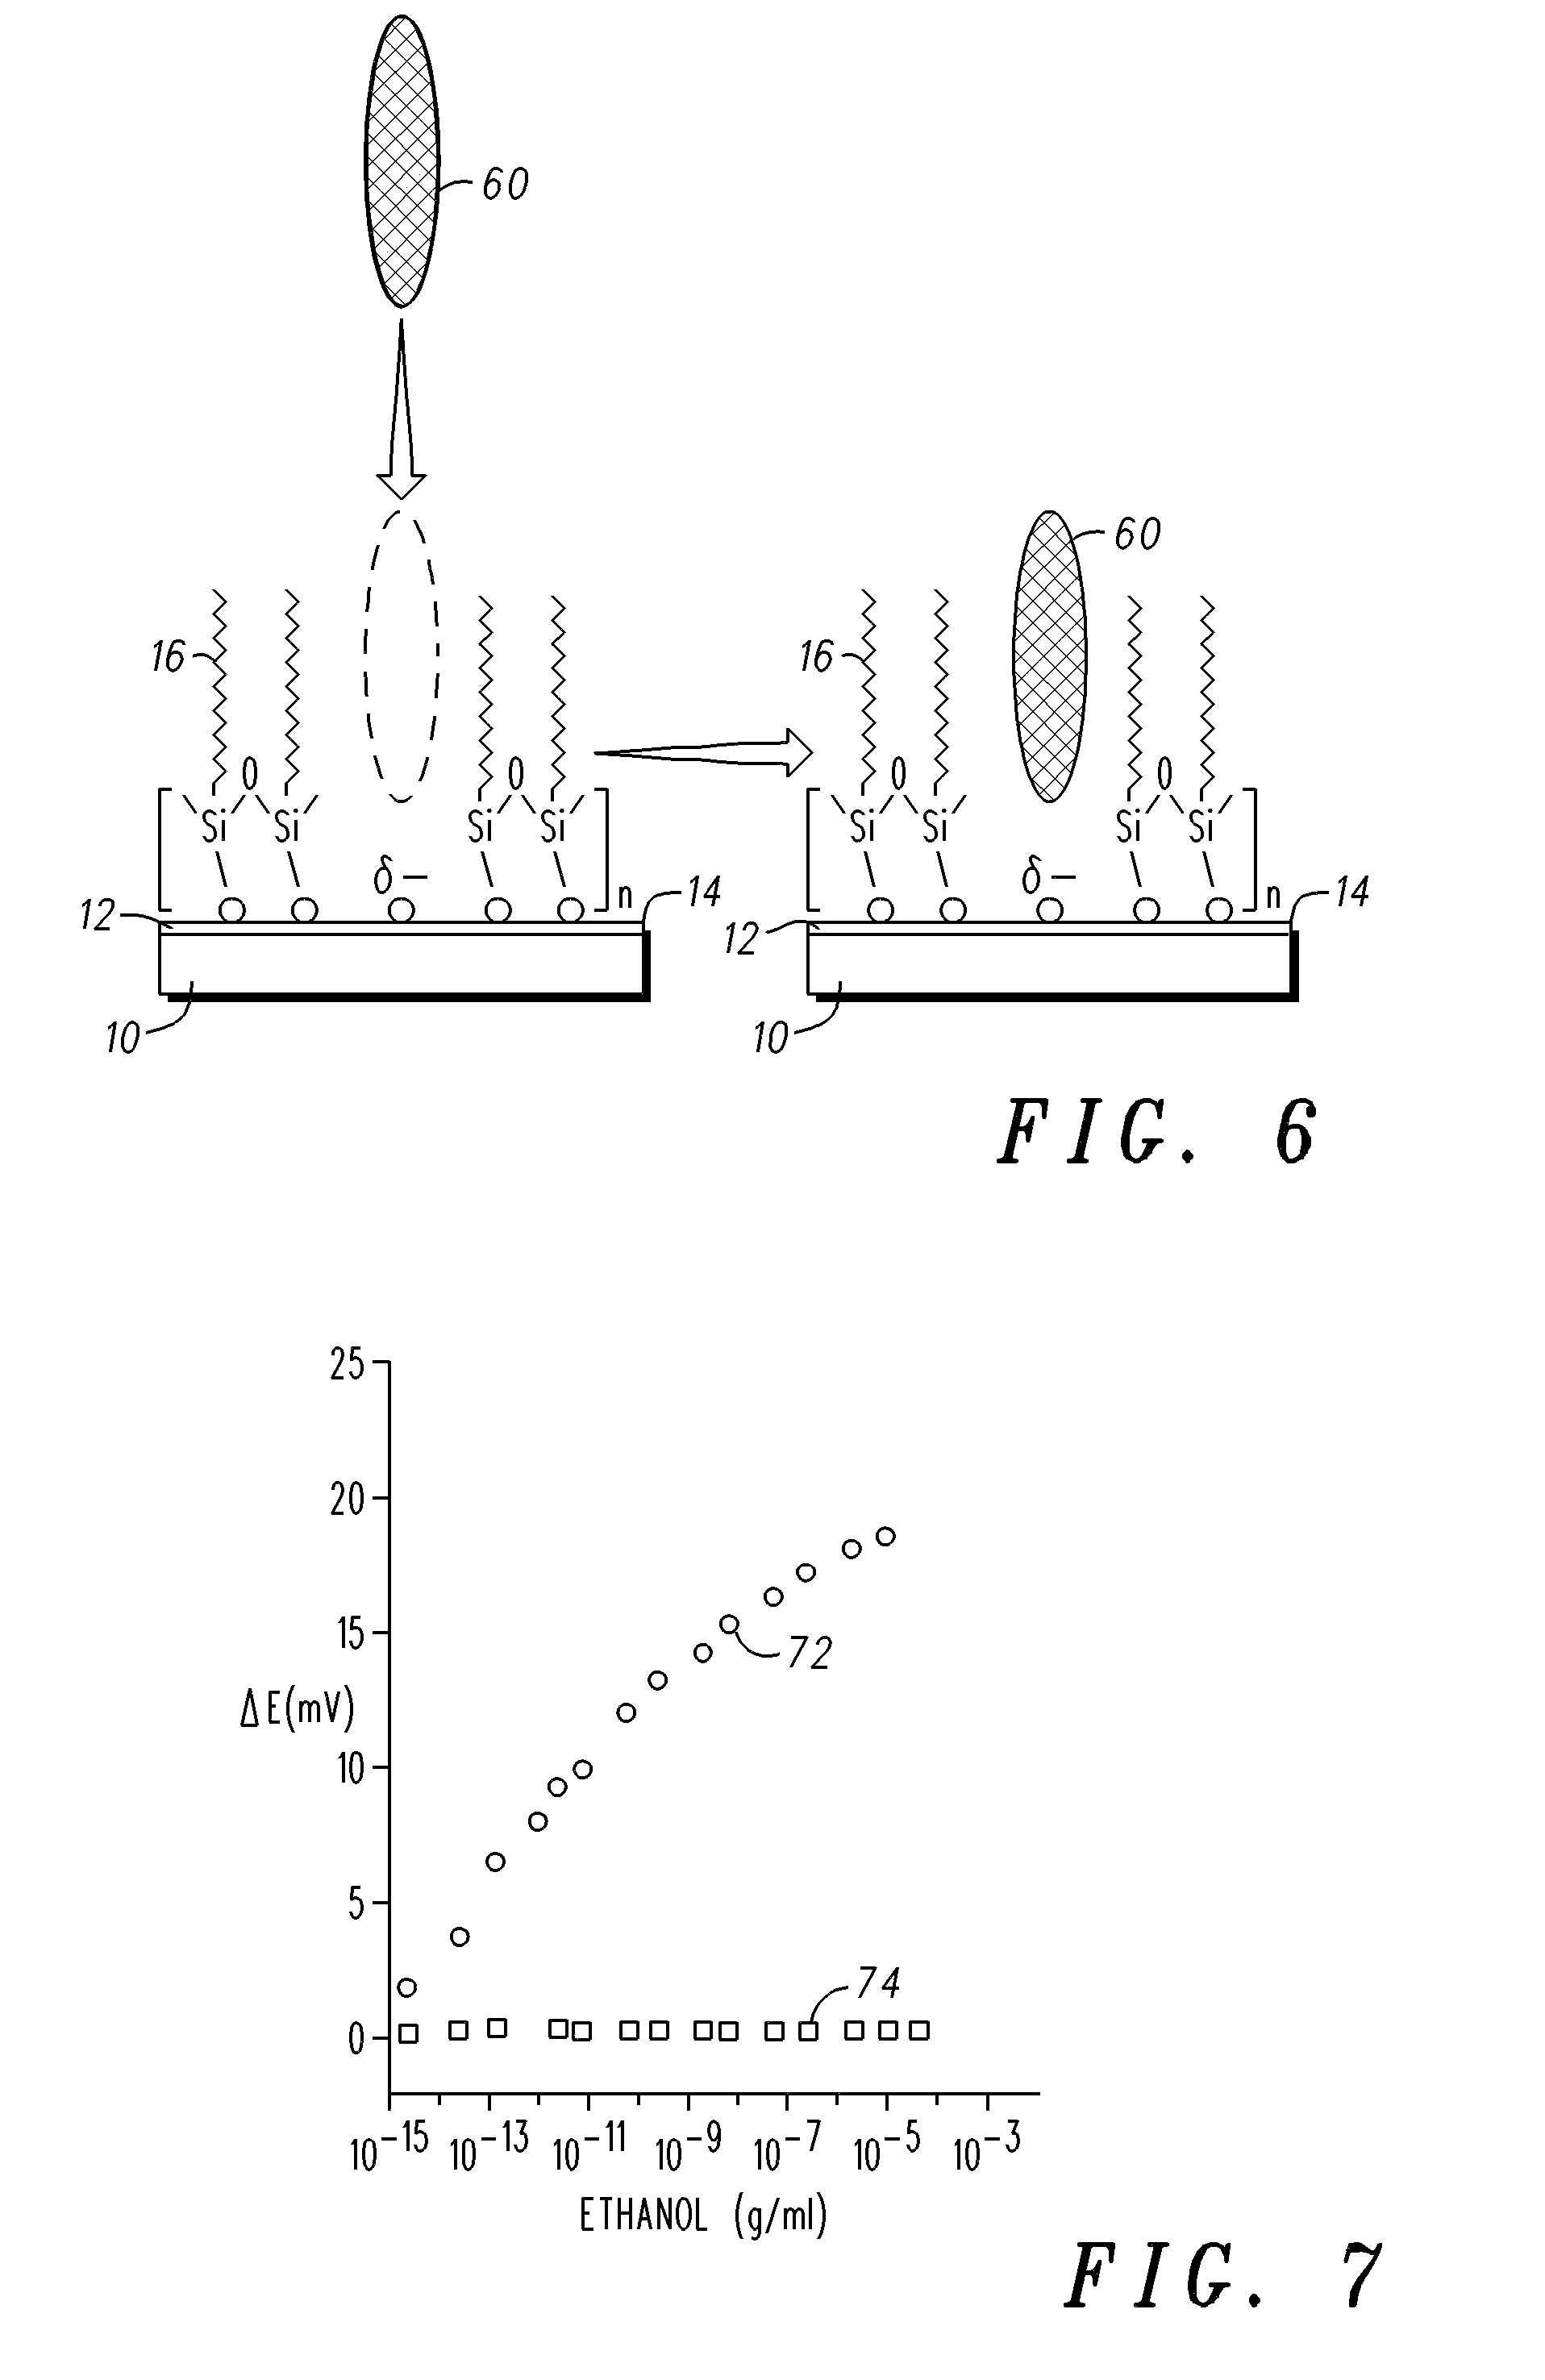 Two-step molecular surface imprinting method for making a sensor